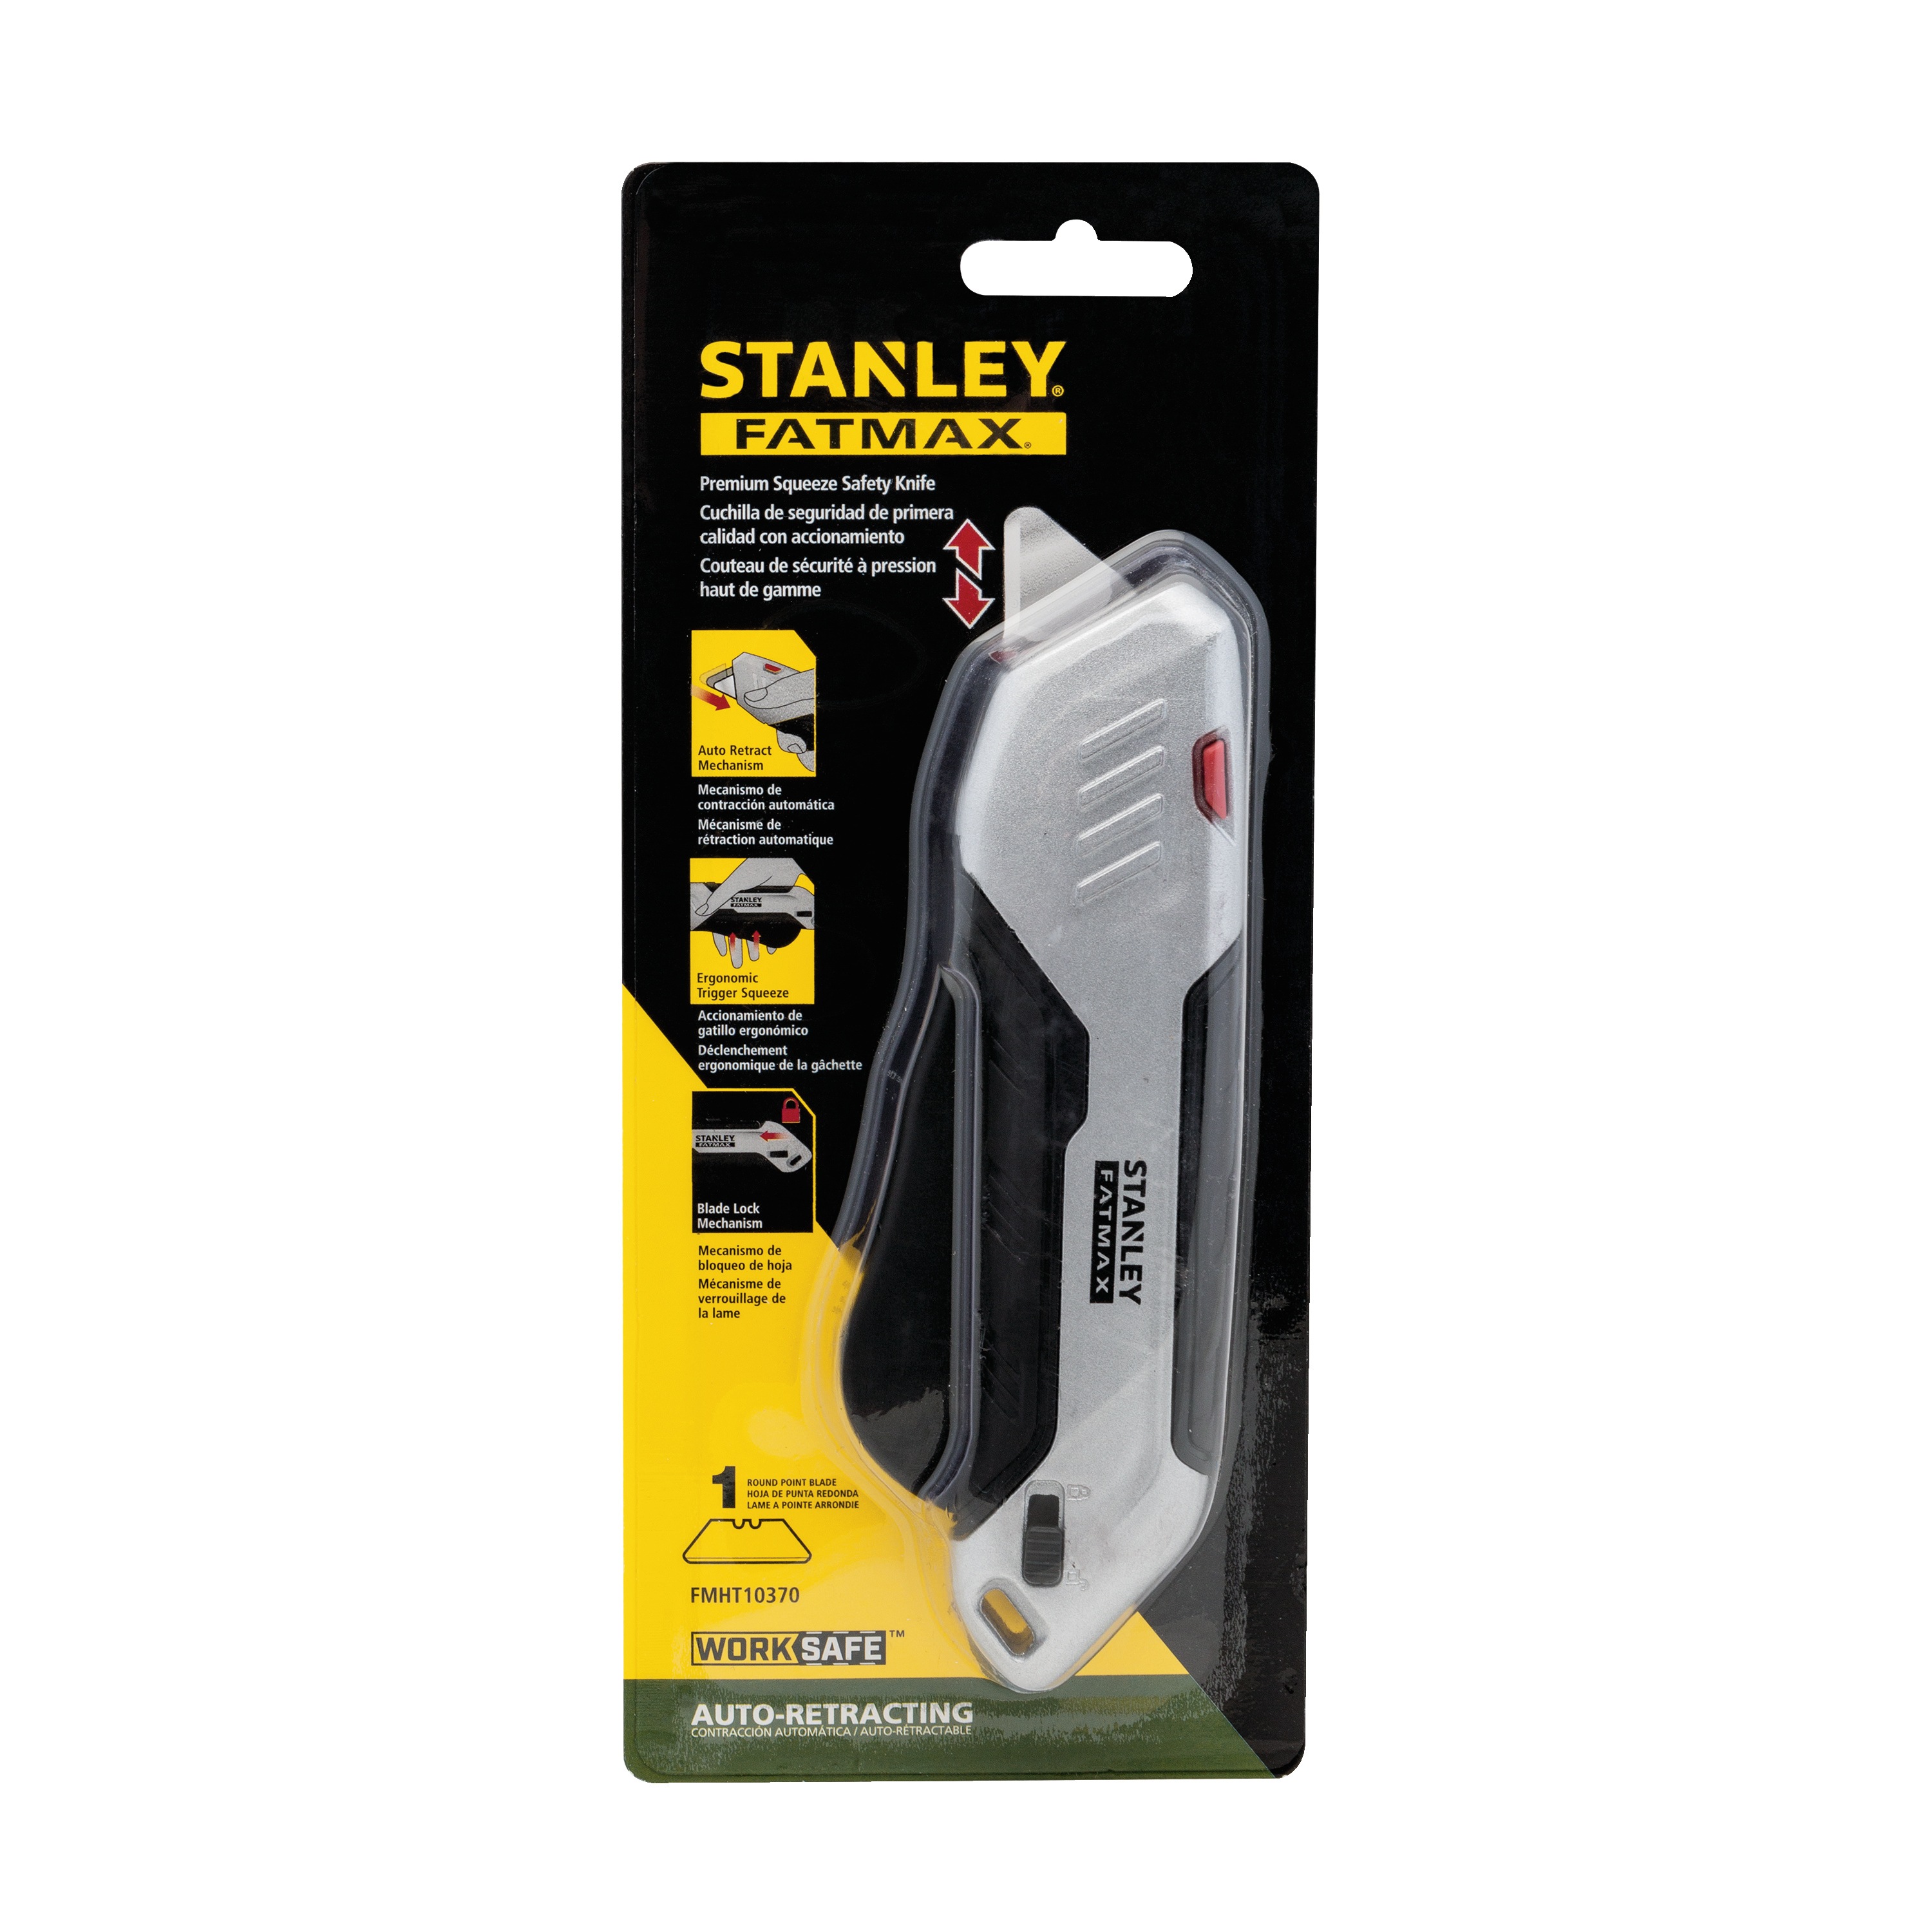 Stanley Tools - FATMAX Premium AutoRetract Squeeze Safety Knife - FMHT10370